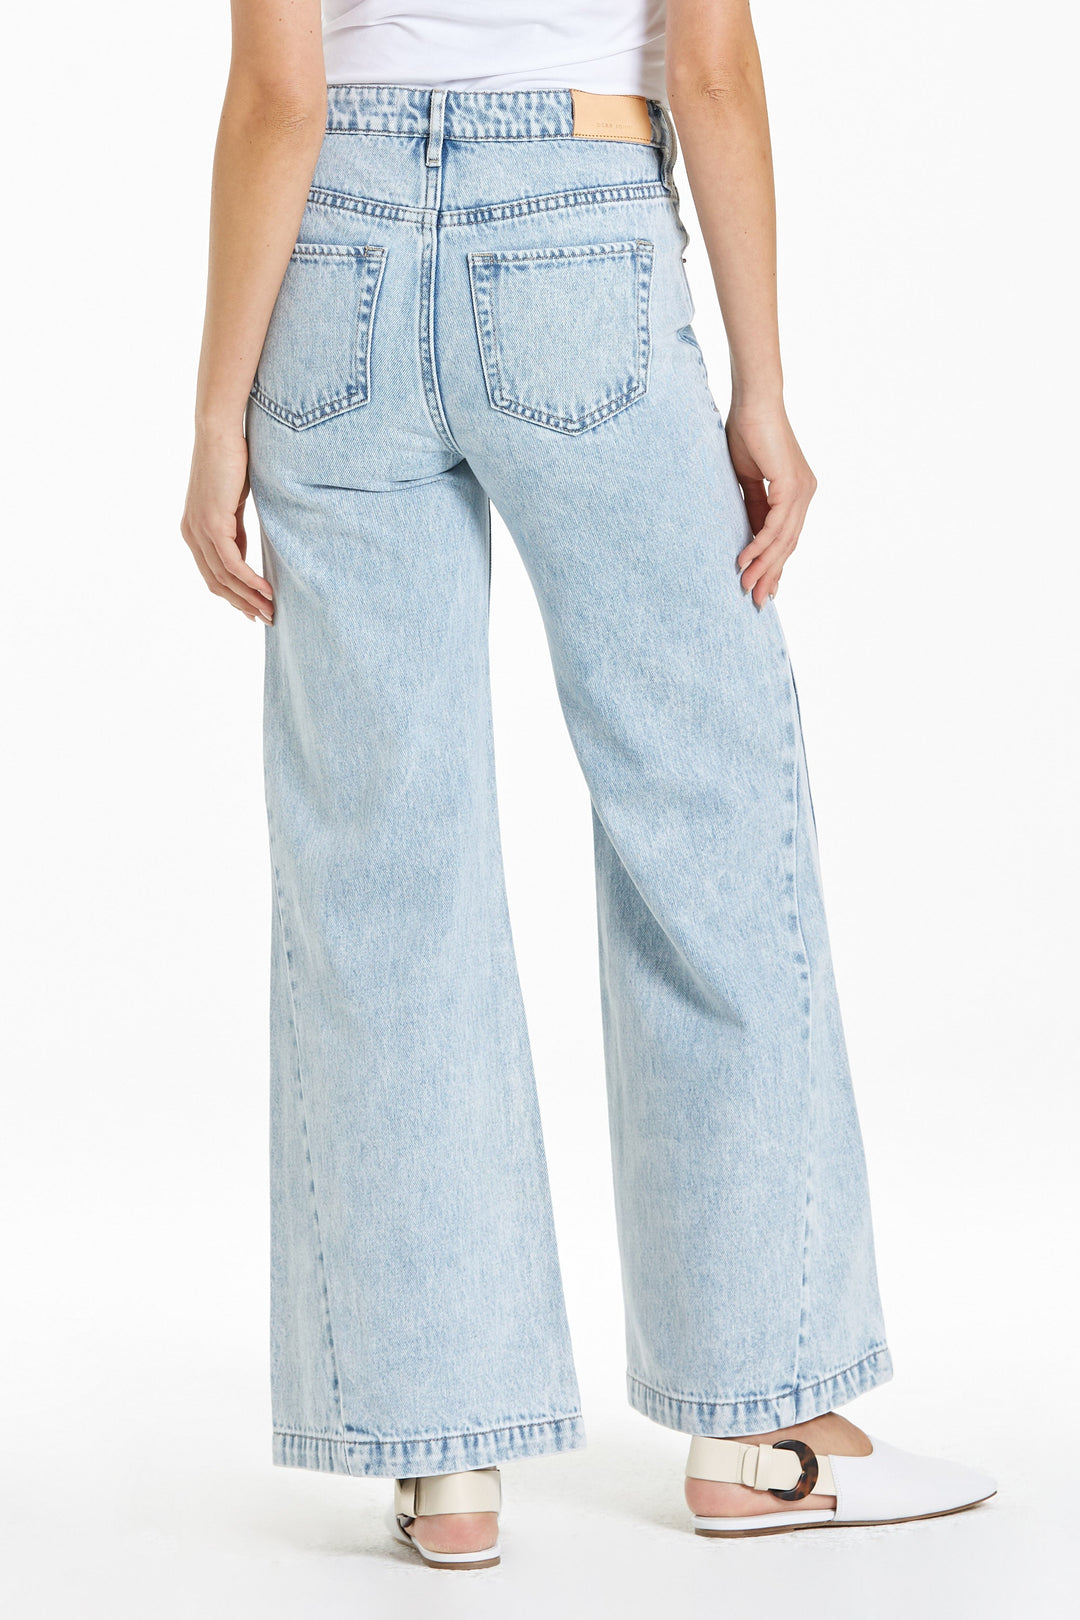 image of a female model wearing a ADDISON SUPER HIGH RISE WIDE LEG JEANS SHOAL BAY JEANS